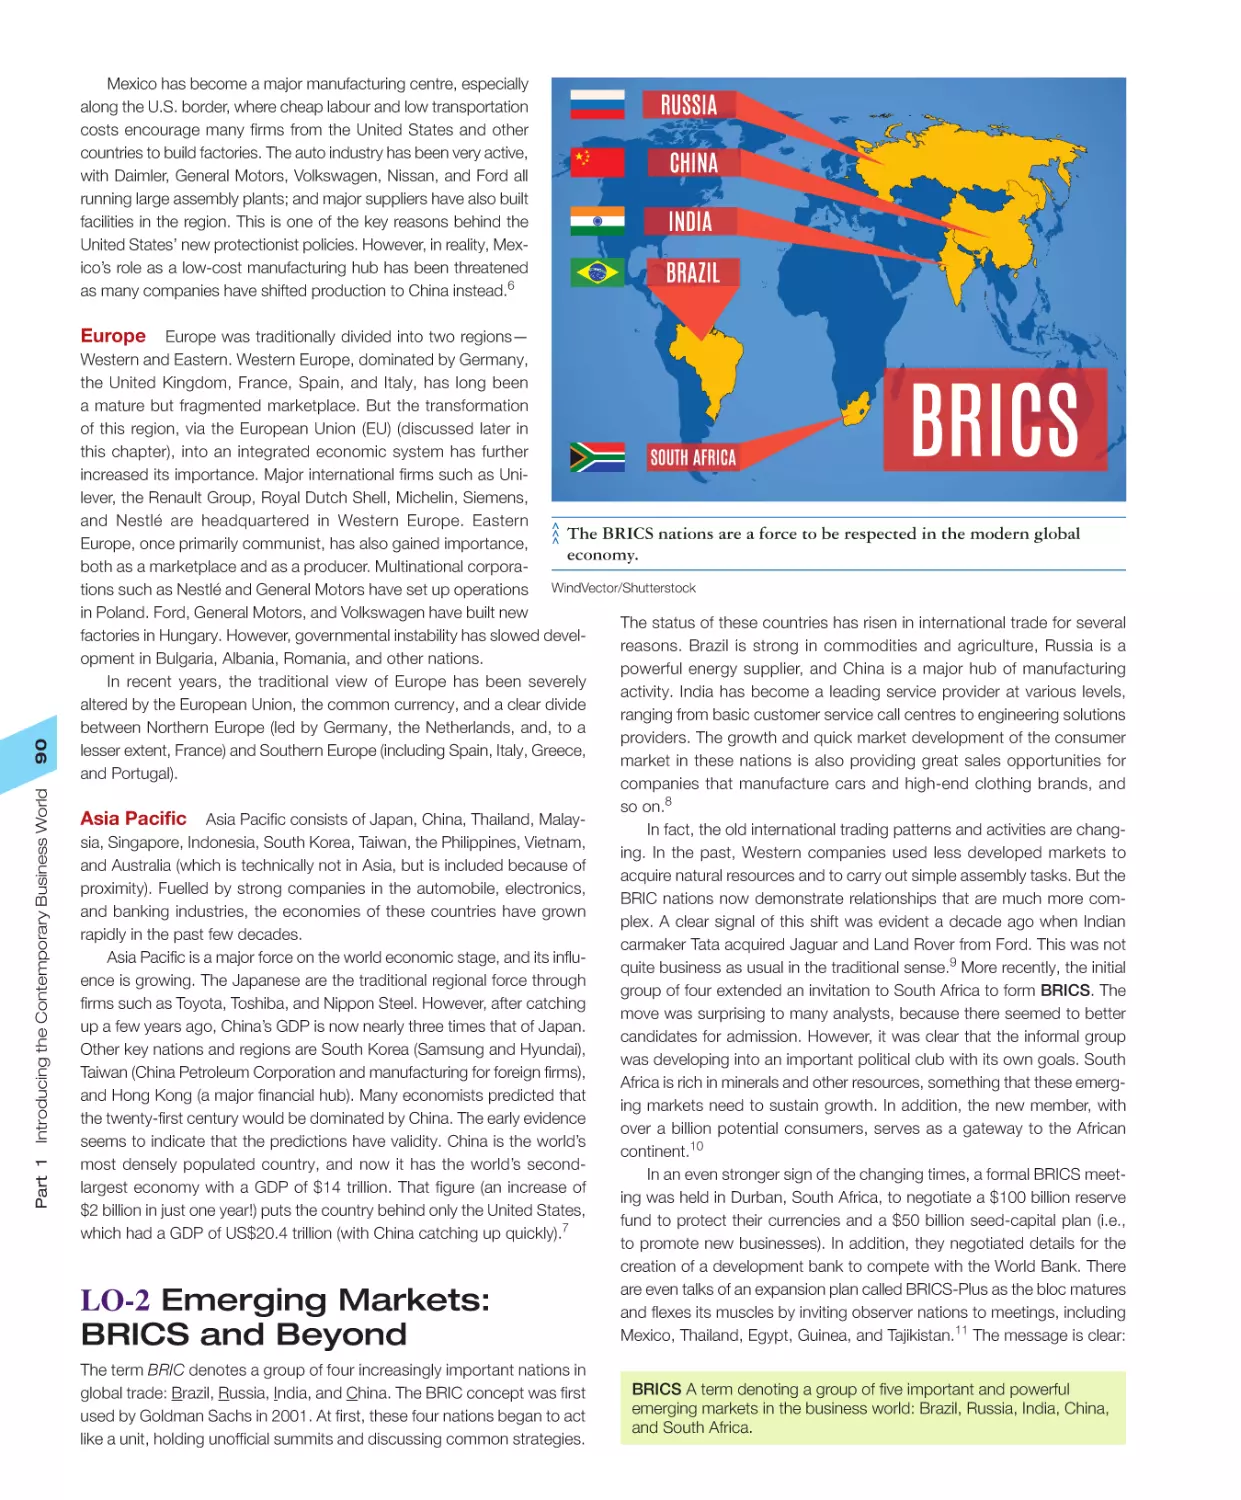 LO‐2 Emerging Markets: BRICS and Beyond